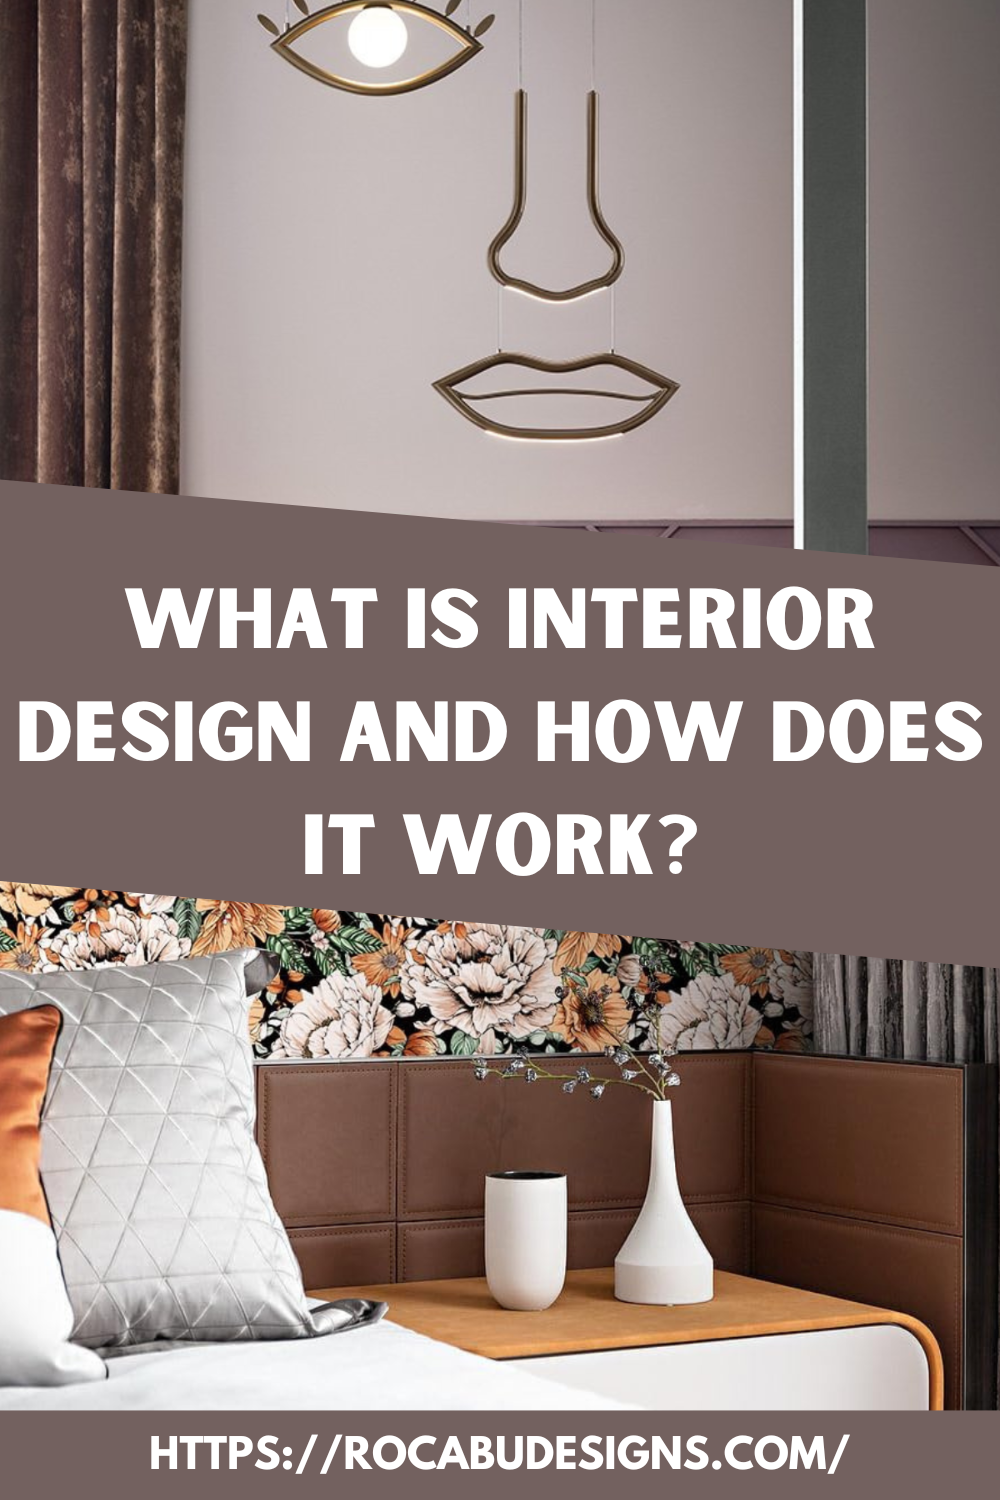 What is Interior Design and How Does it Work?